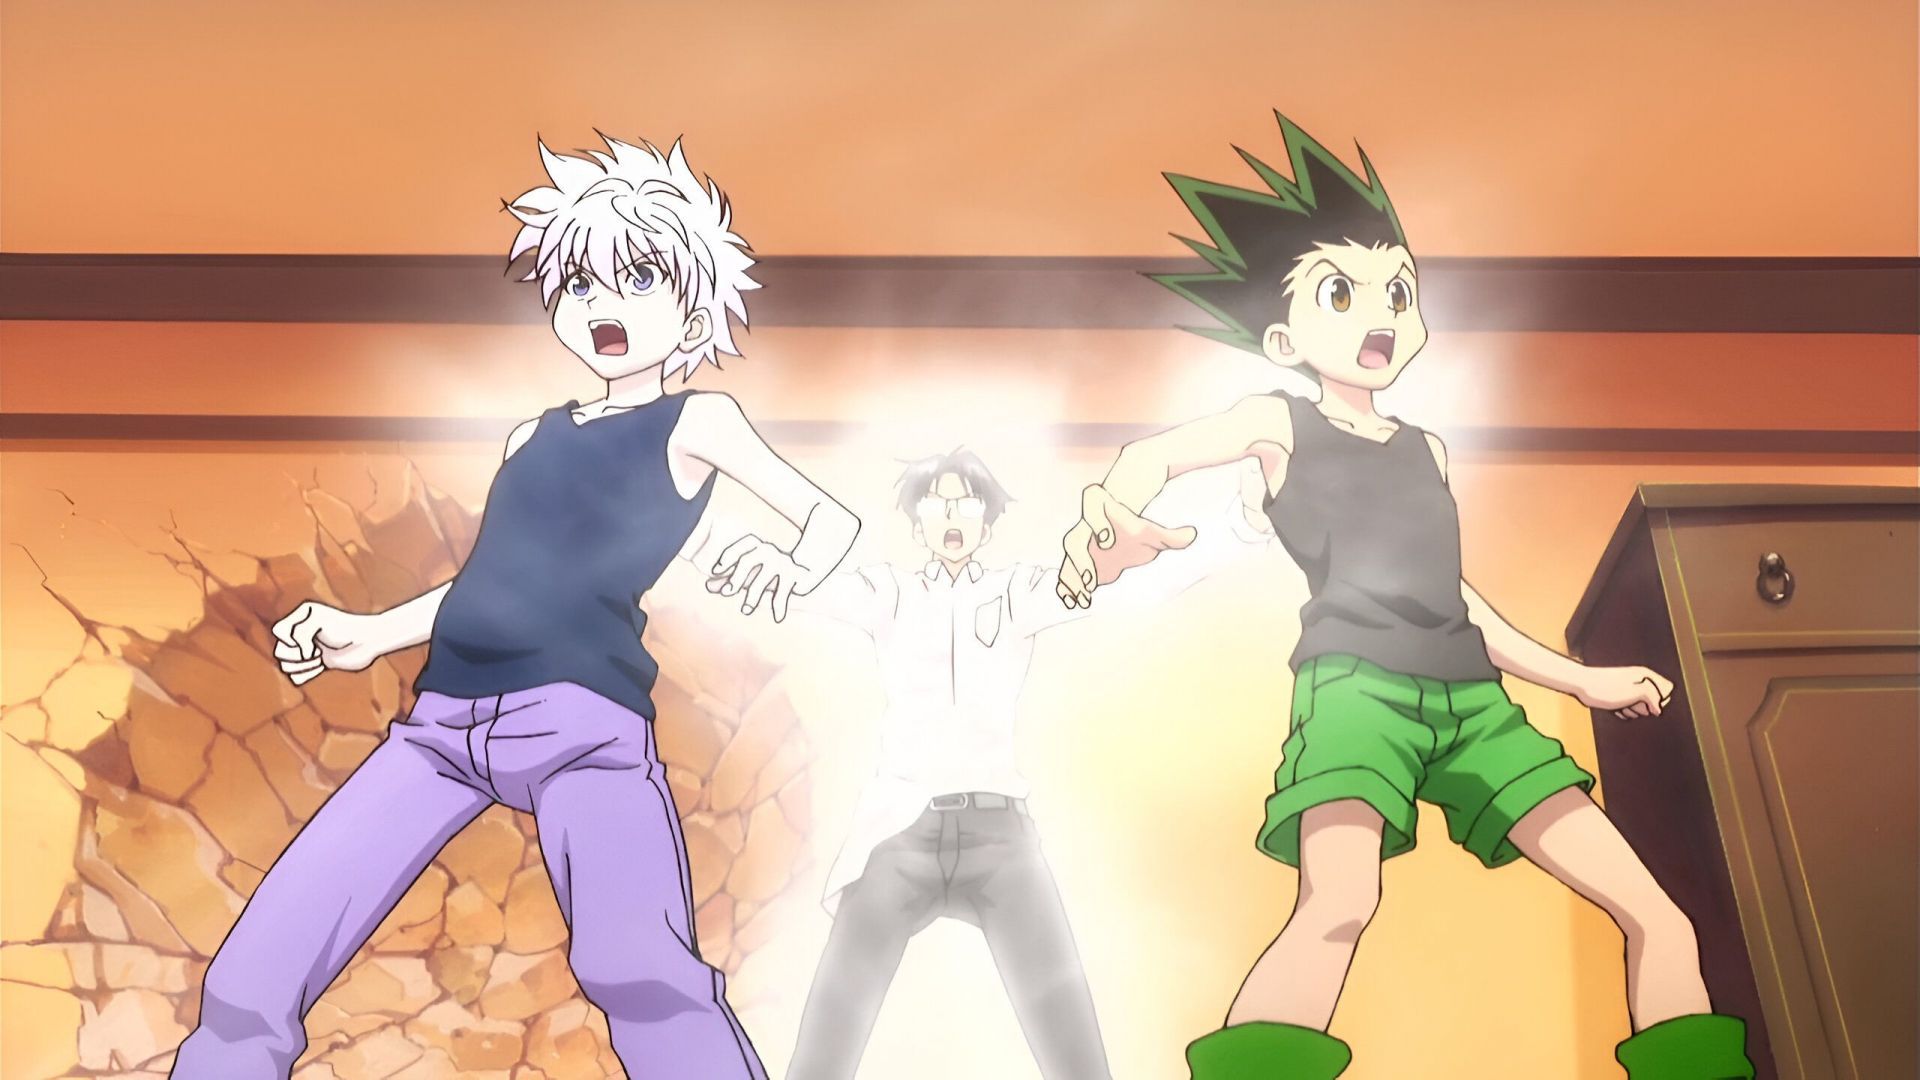 Killua (left) and Gon (right) getting their Nen nodes opened through Initiation (Image via Madhouse)